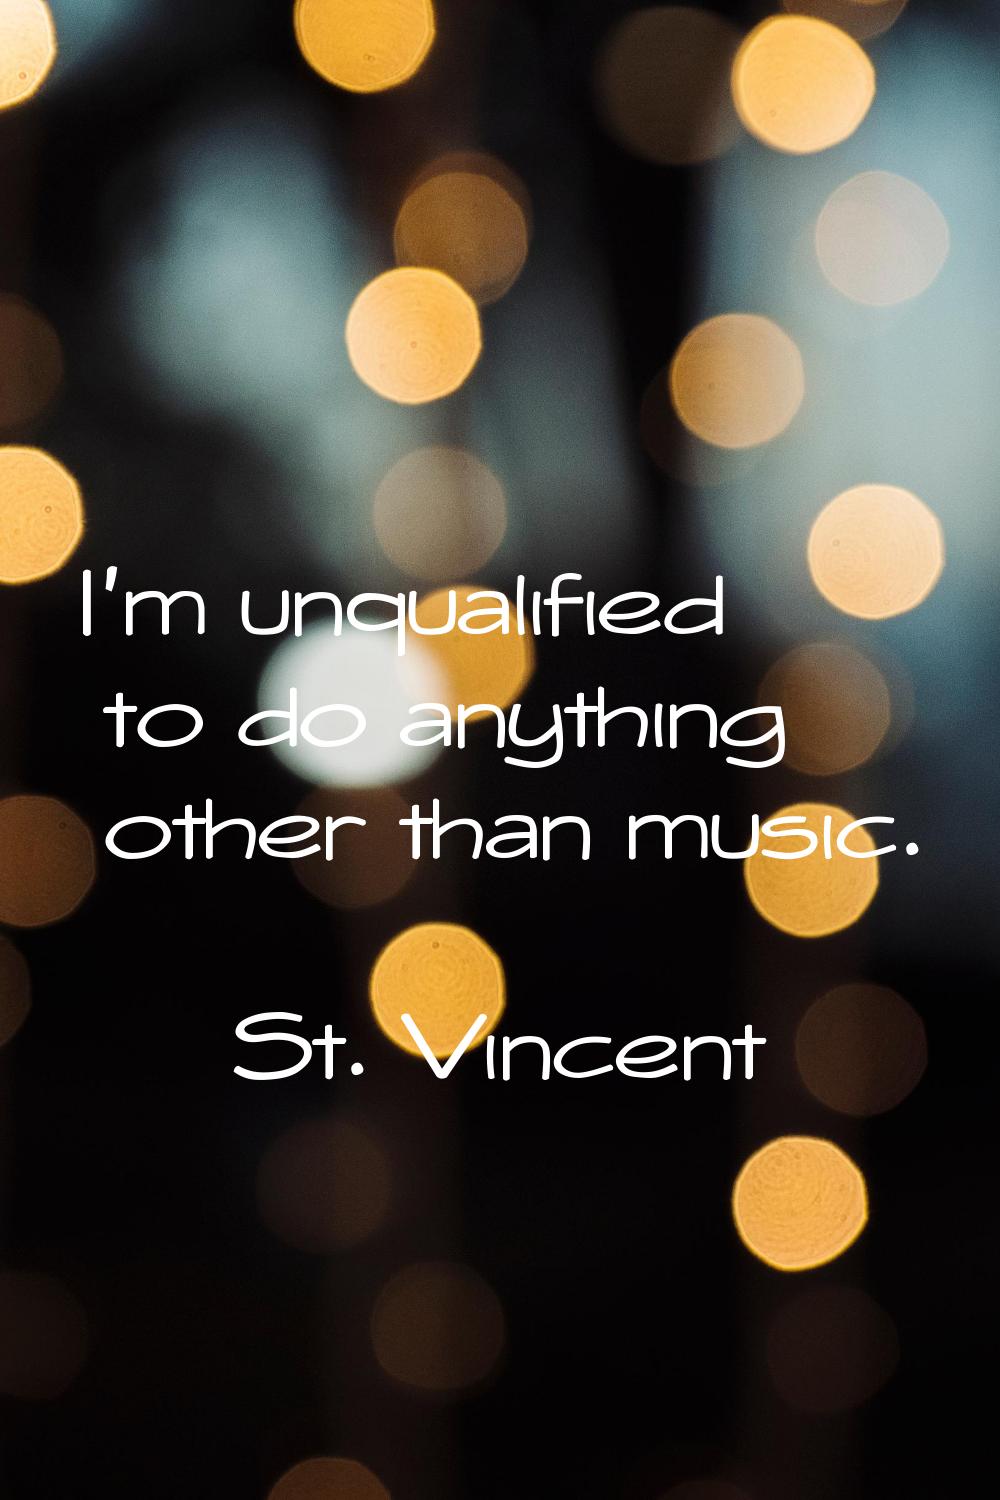 I'm unqualified to do anything other than music.